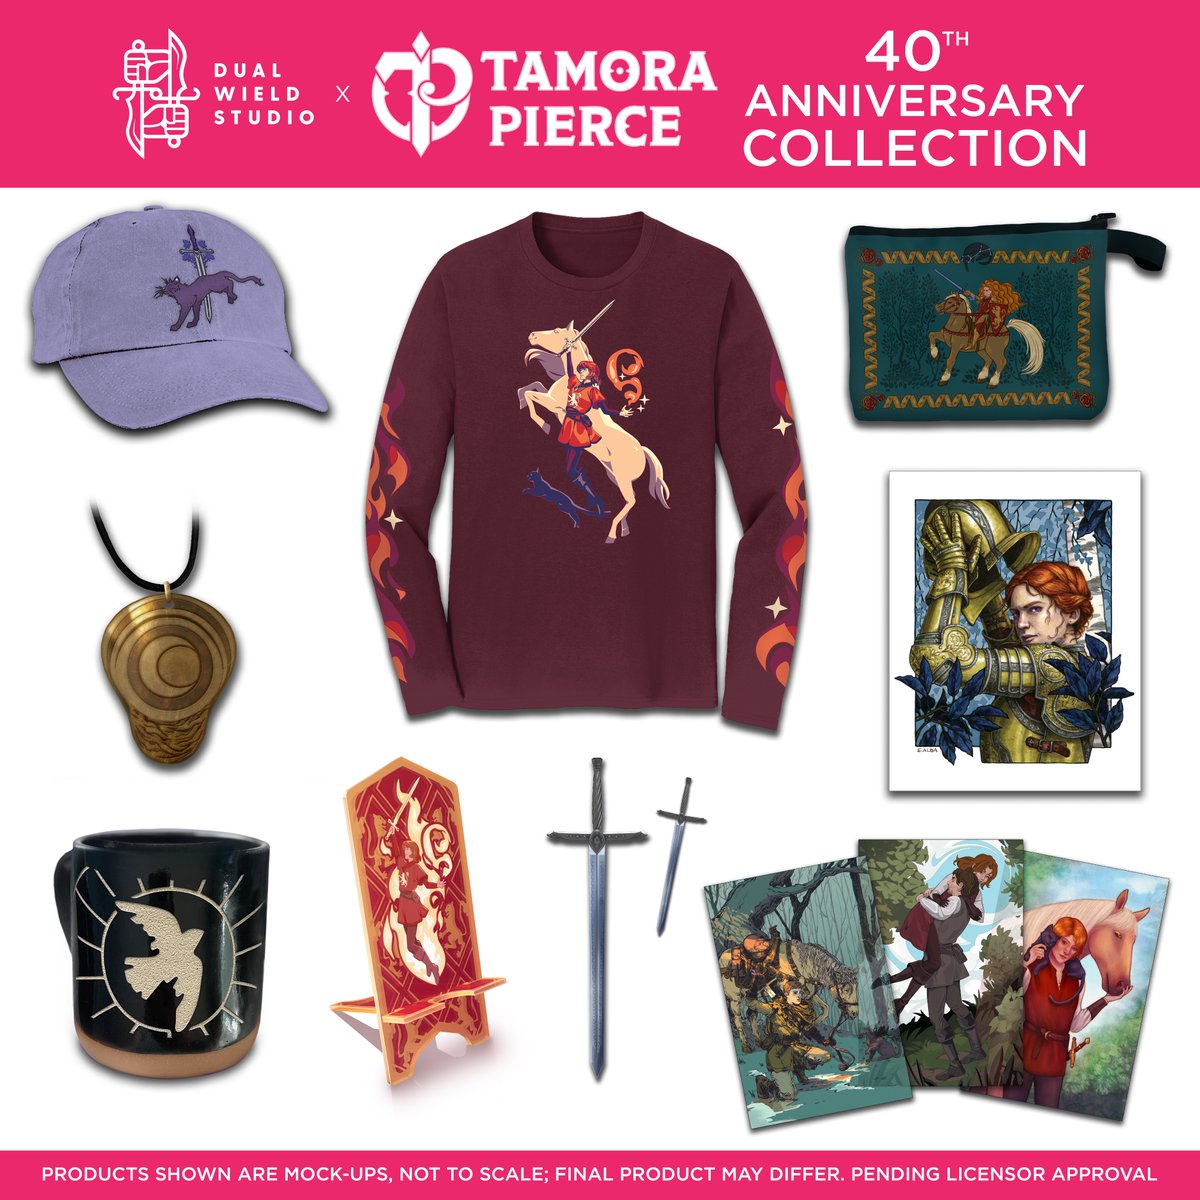 In honor of the 40th anniversary of Alanna: The First Adventure–the first installment of the Song of the Lioness fantasy novel quartet by Tamora Pierce, we're proud to announce the Alanna 40th Anniversary Collection, coming May 2024. Check out some sneak peeks of what's to come: